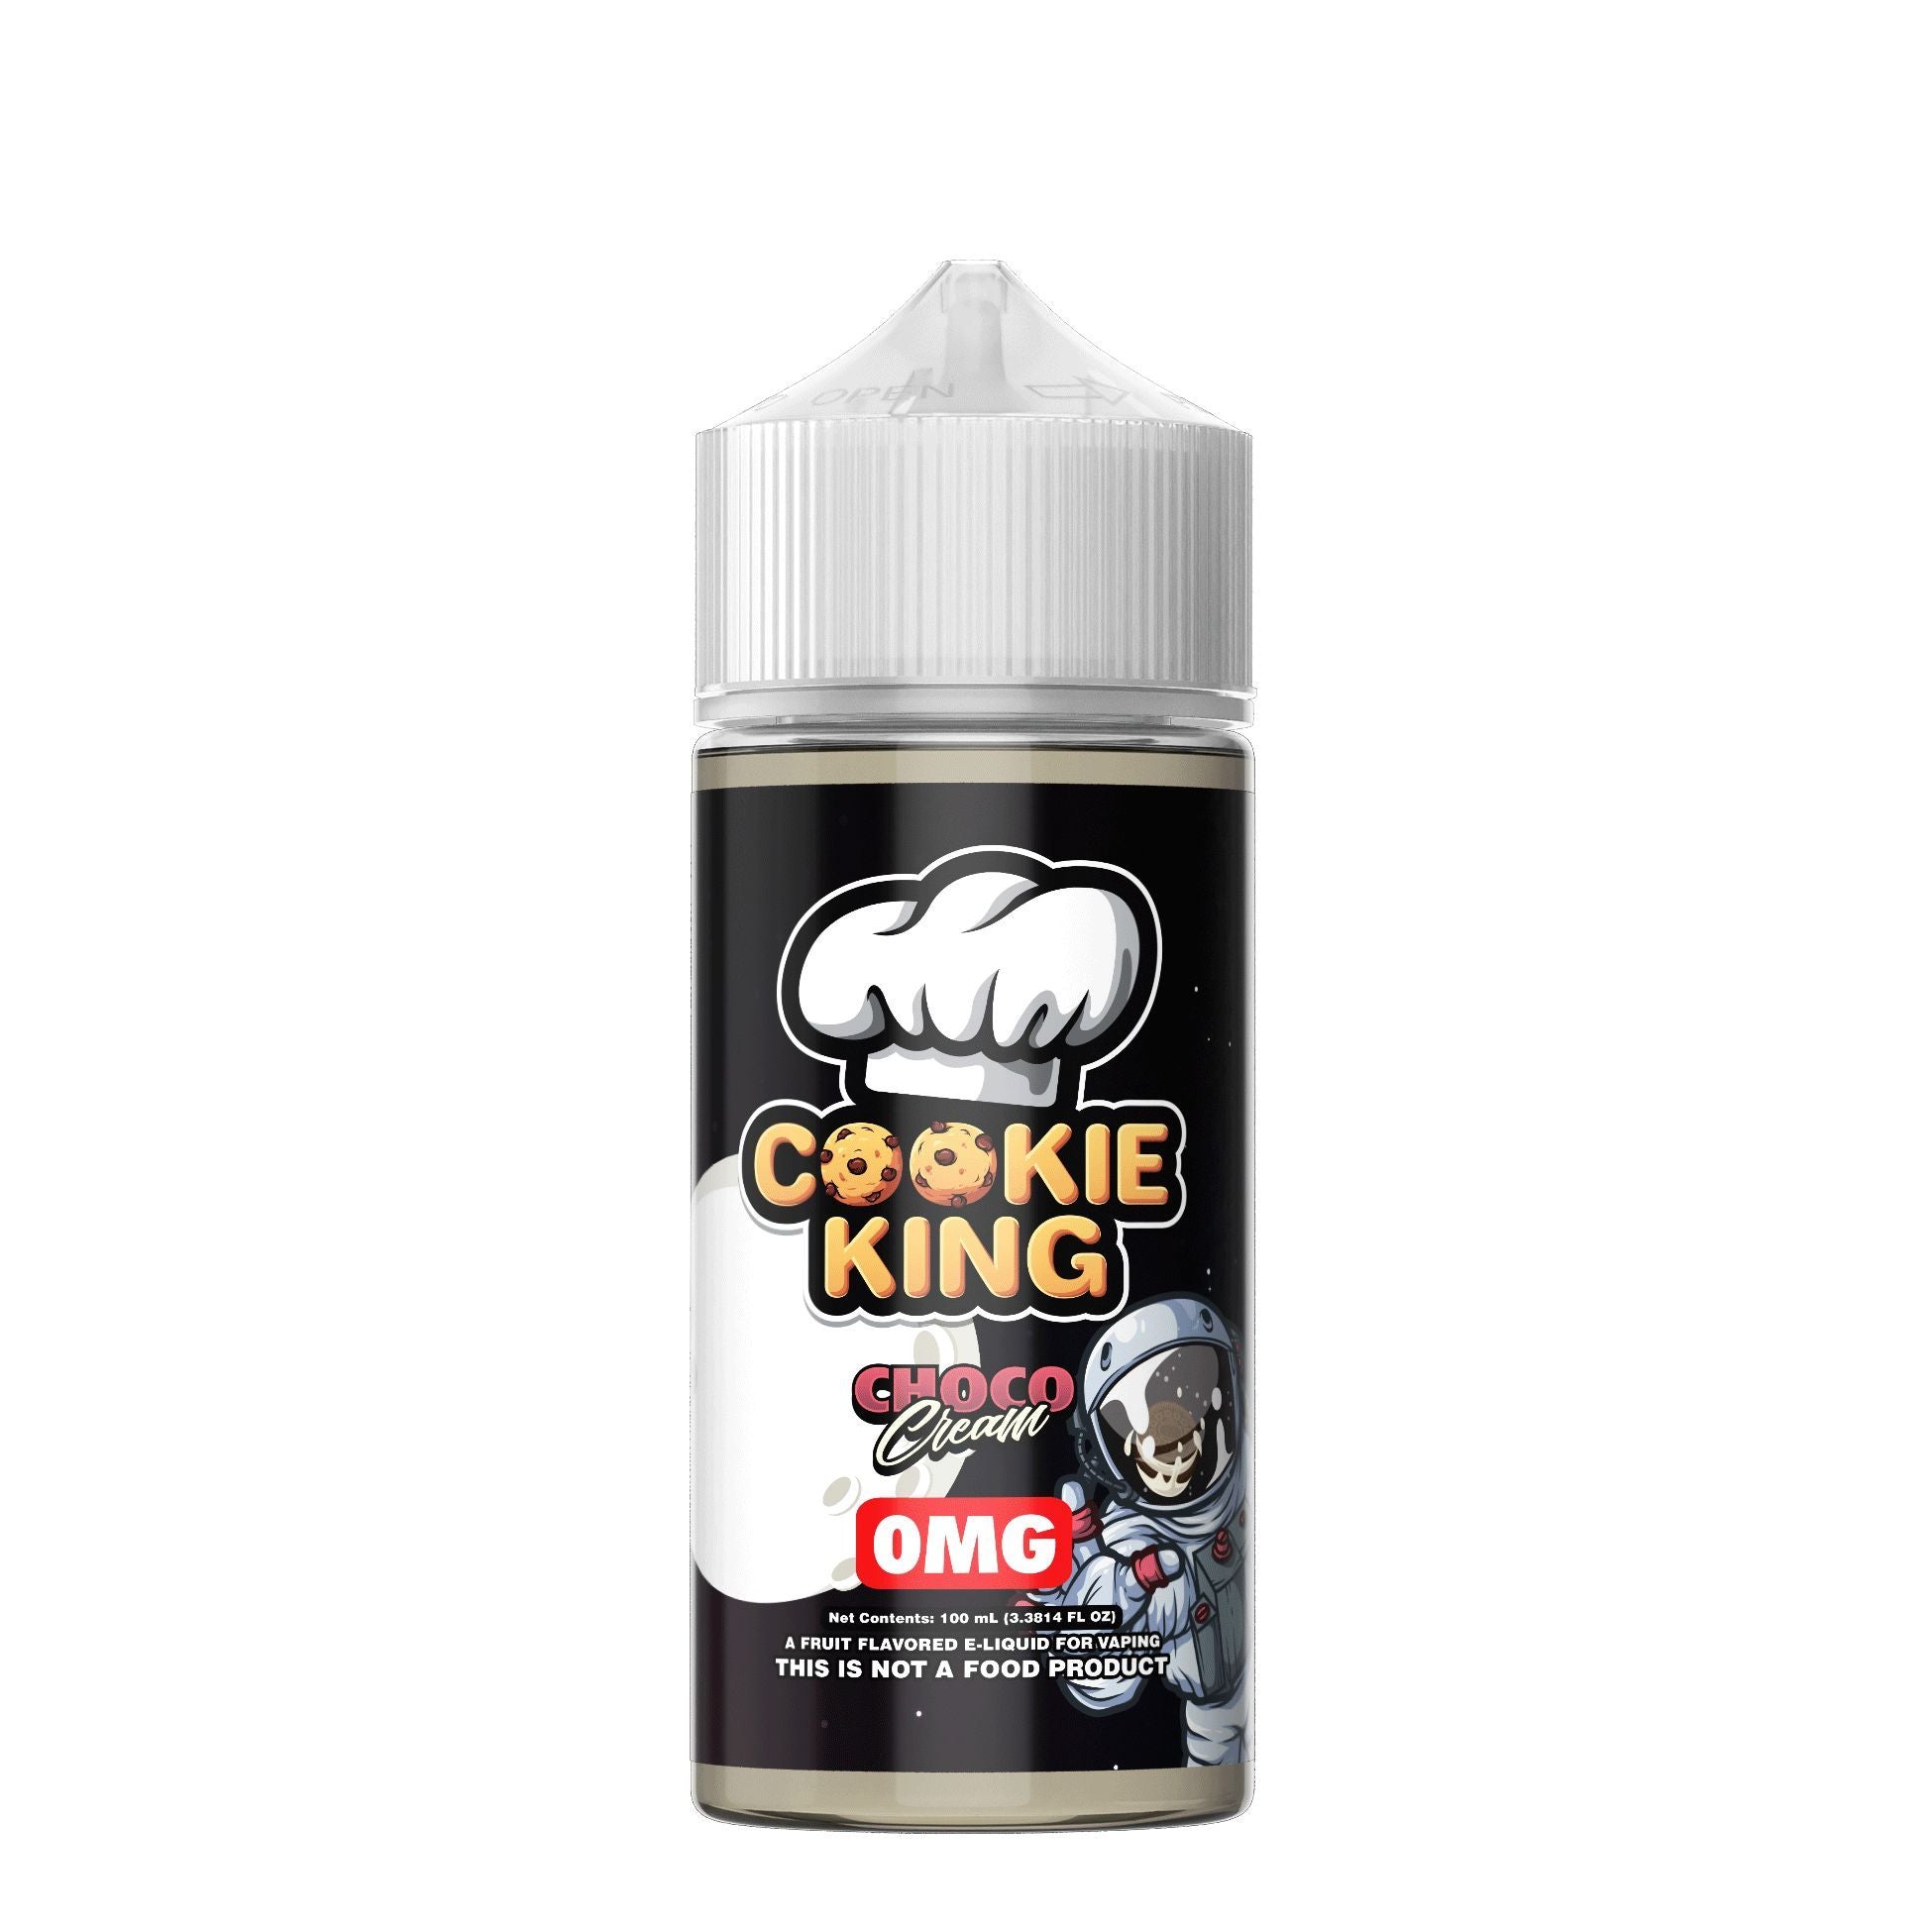 Buy Cookie King Choco Cream - Wick and Wire Co Melbourne Vape Shop, Victoria Australia